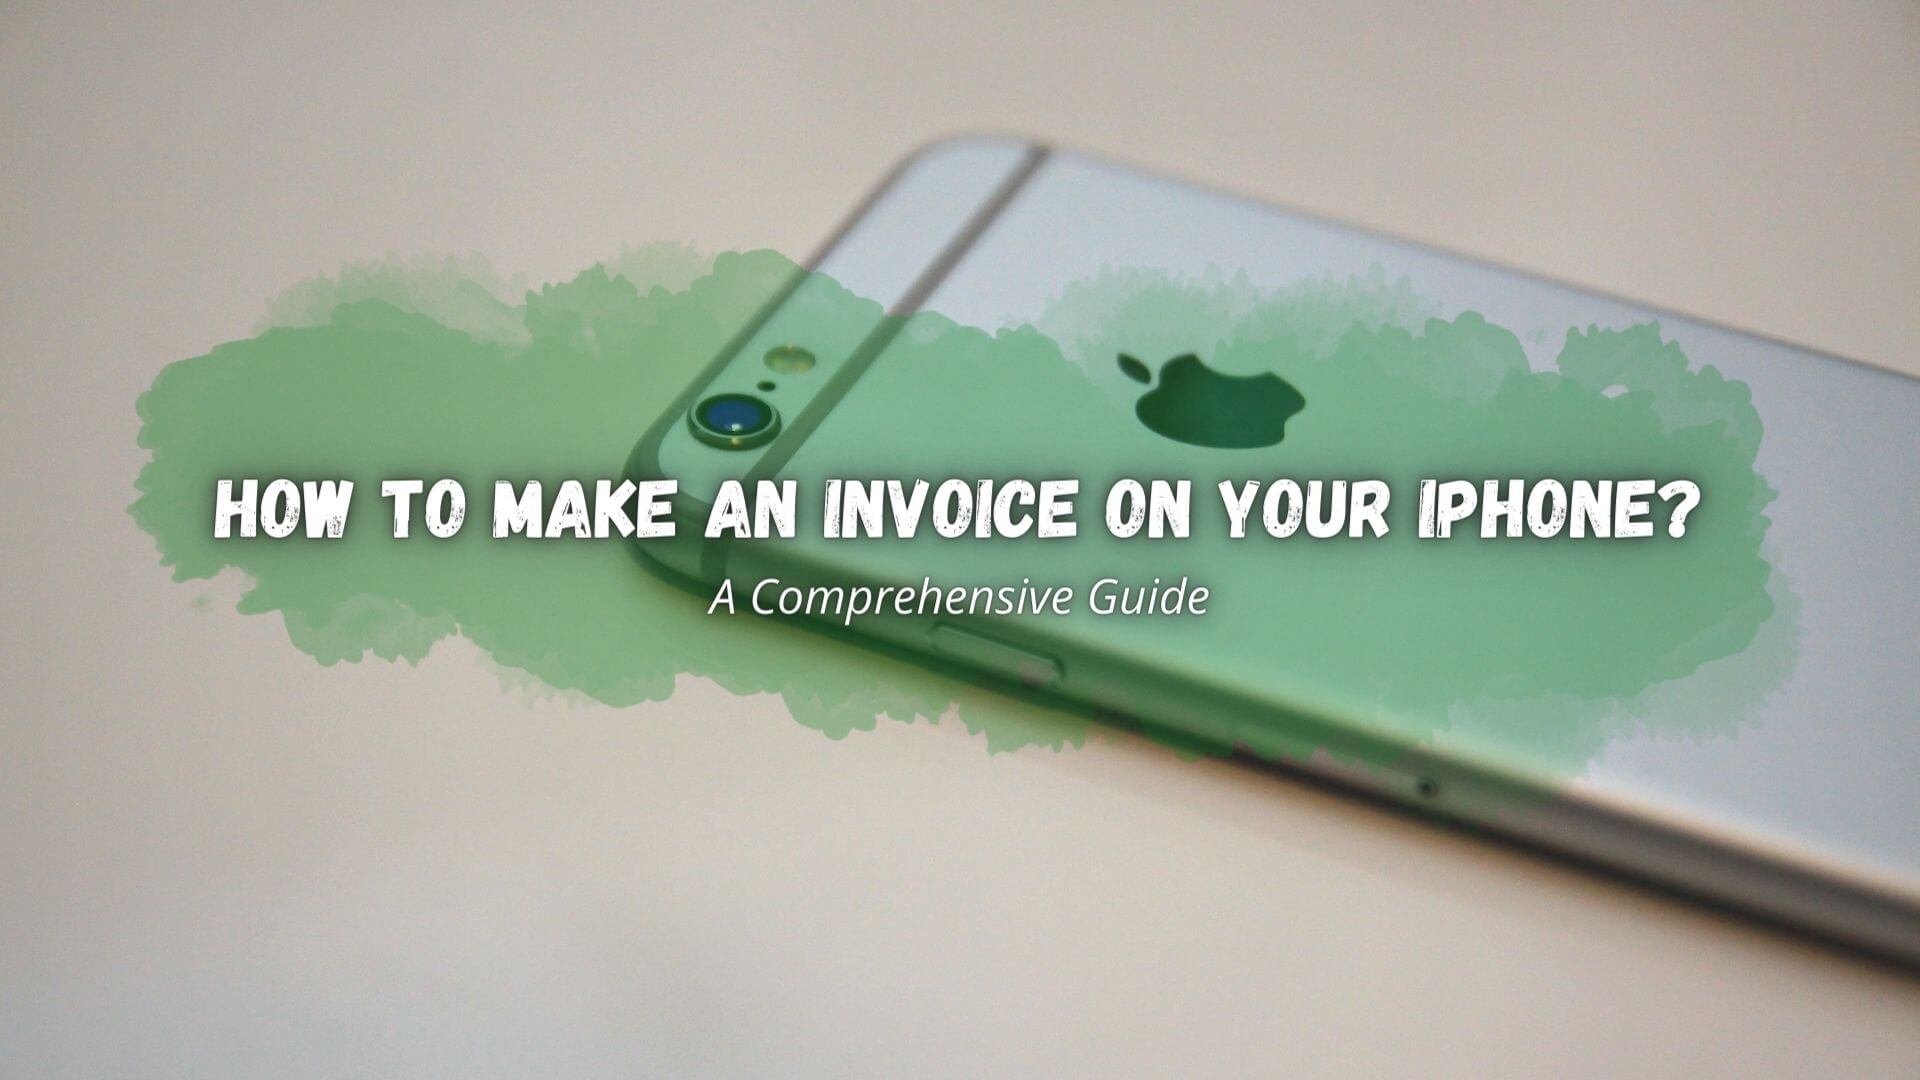 Do you need to create an invoice quickly but don't have access to a computer? No problem! Here's how to make an invoice on your iPhone!